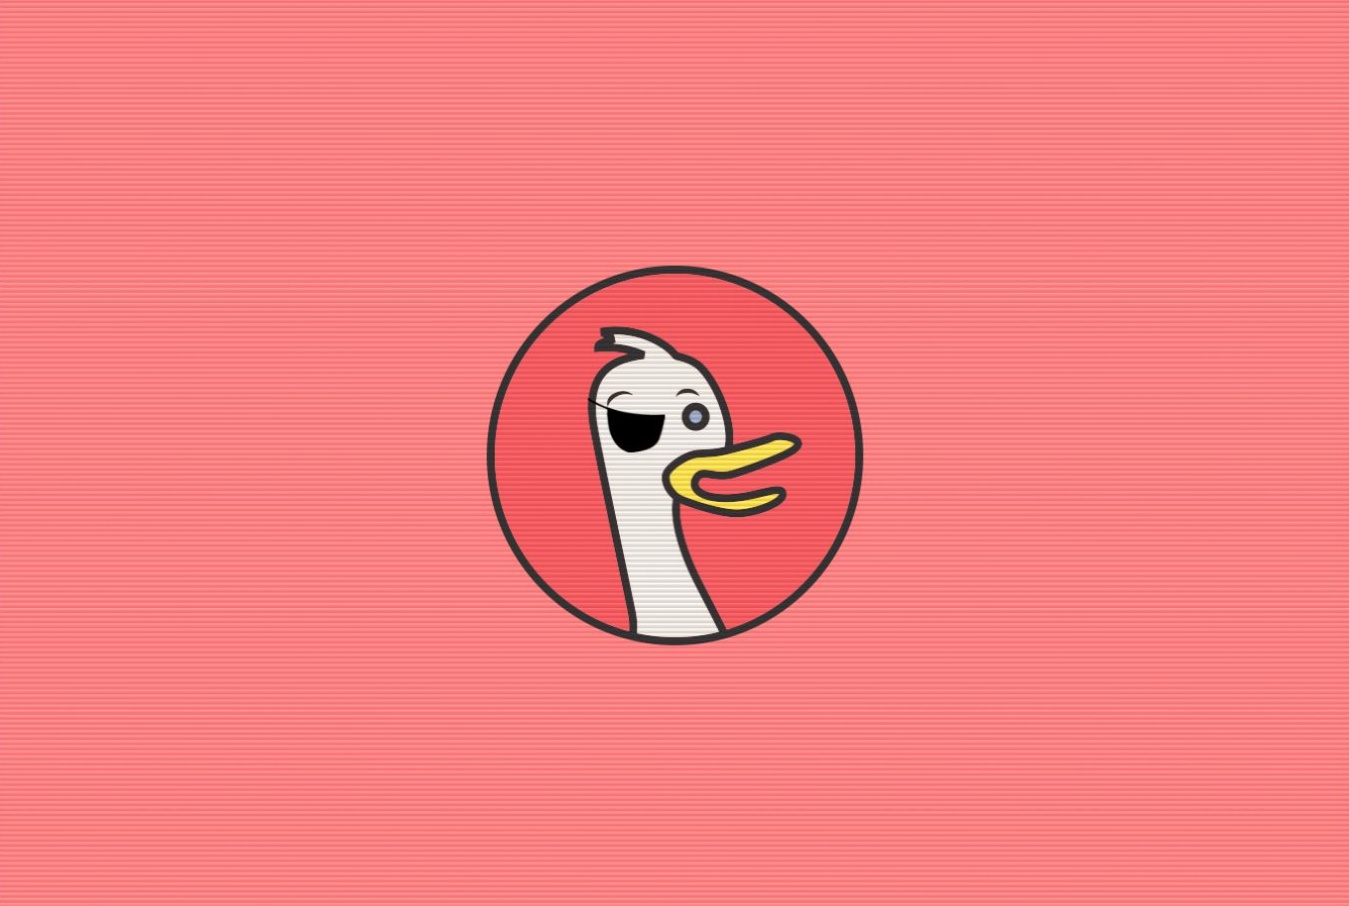 DuckDuckGo collecting user browsing data without consent